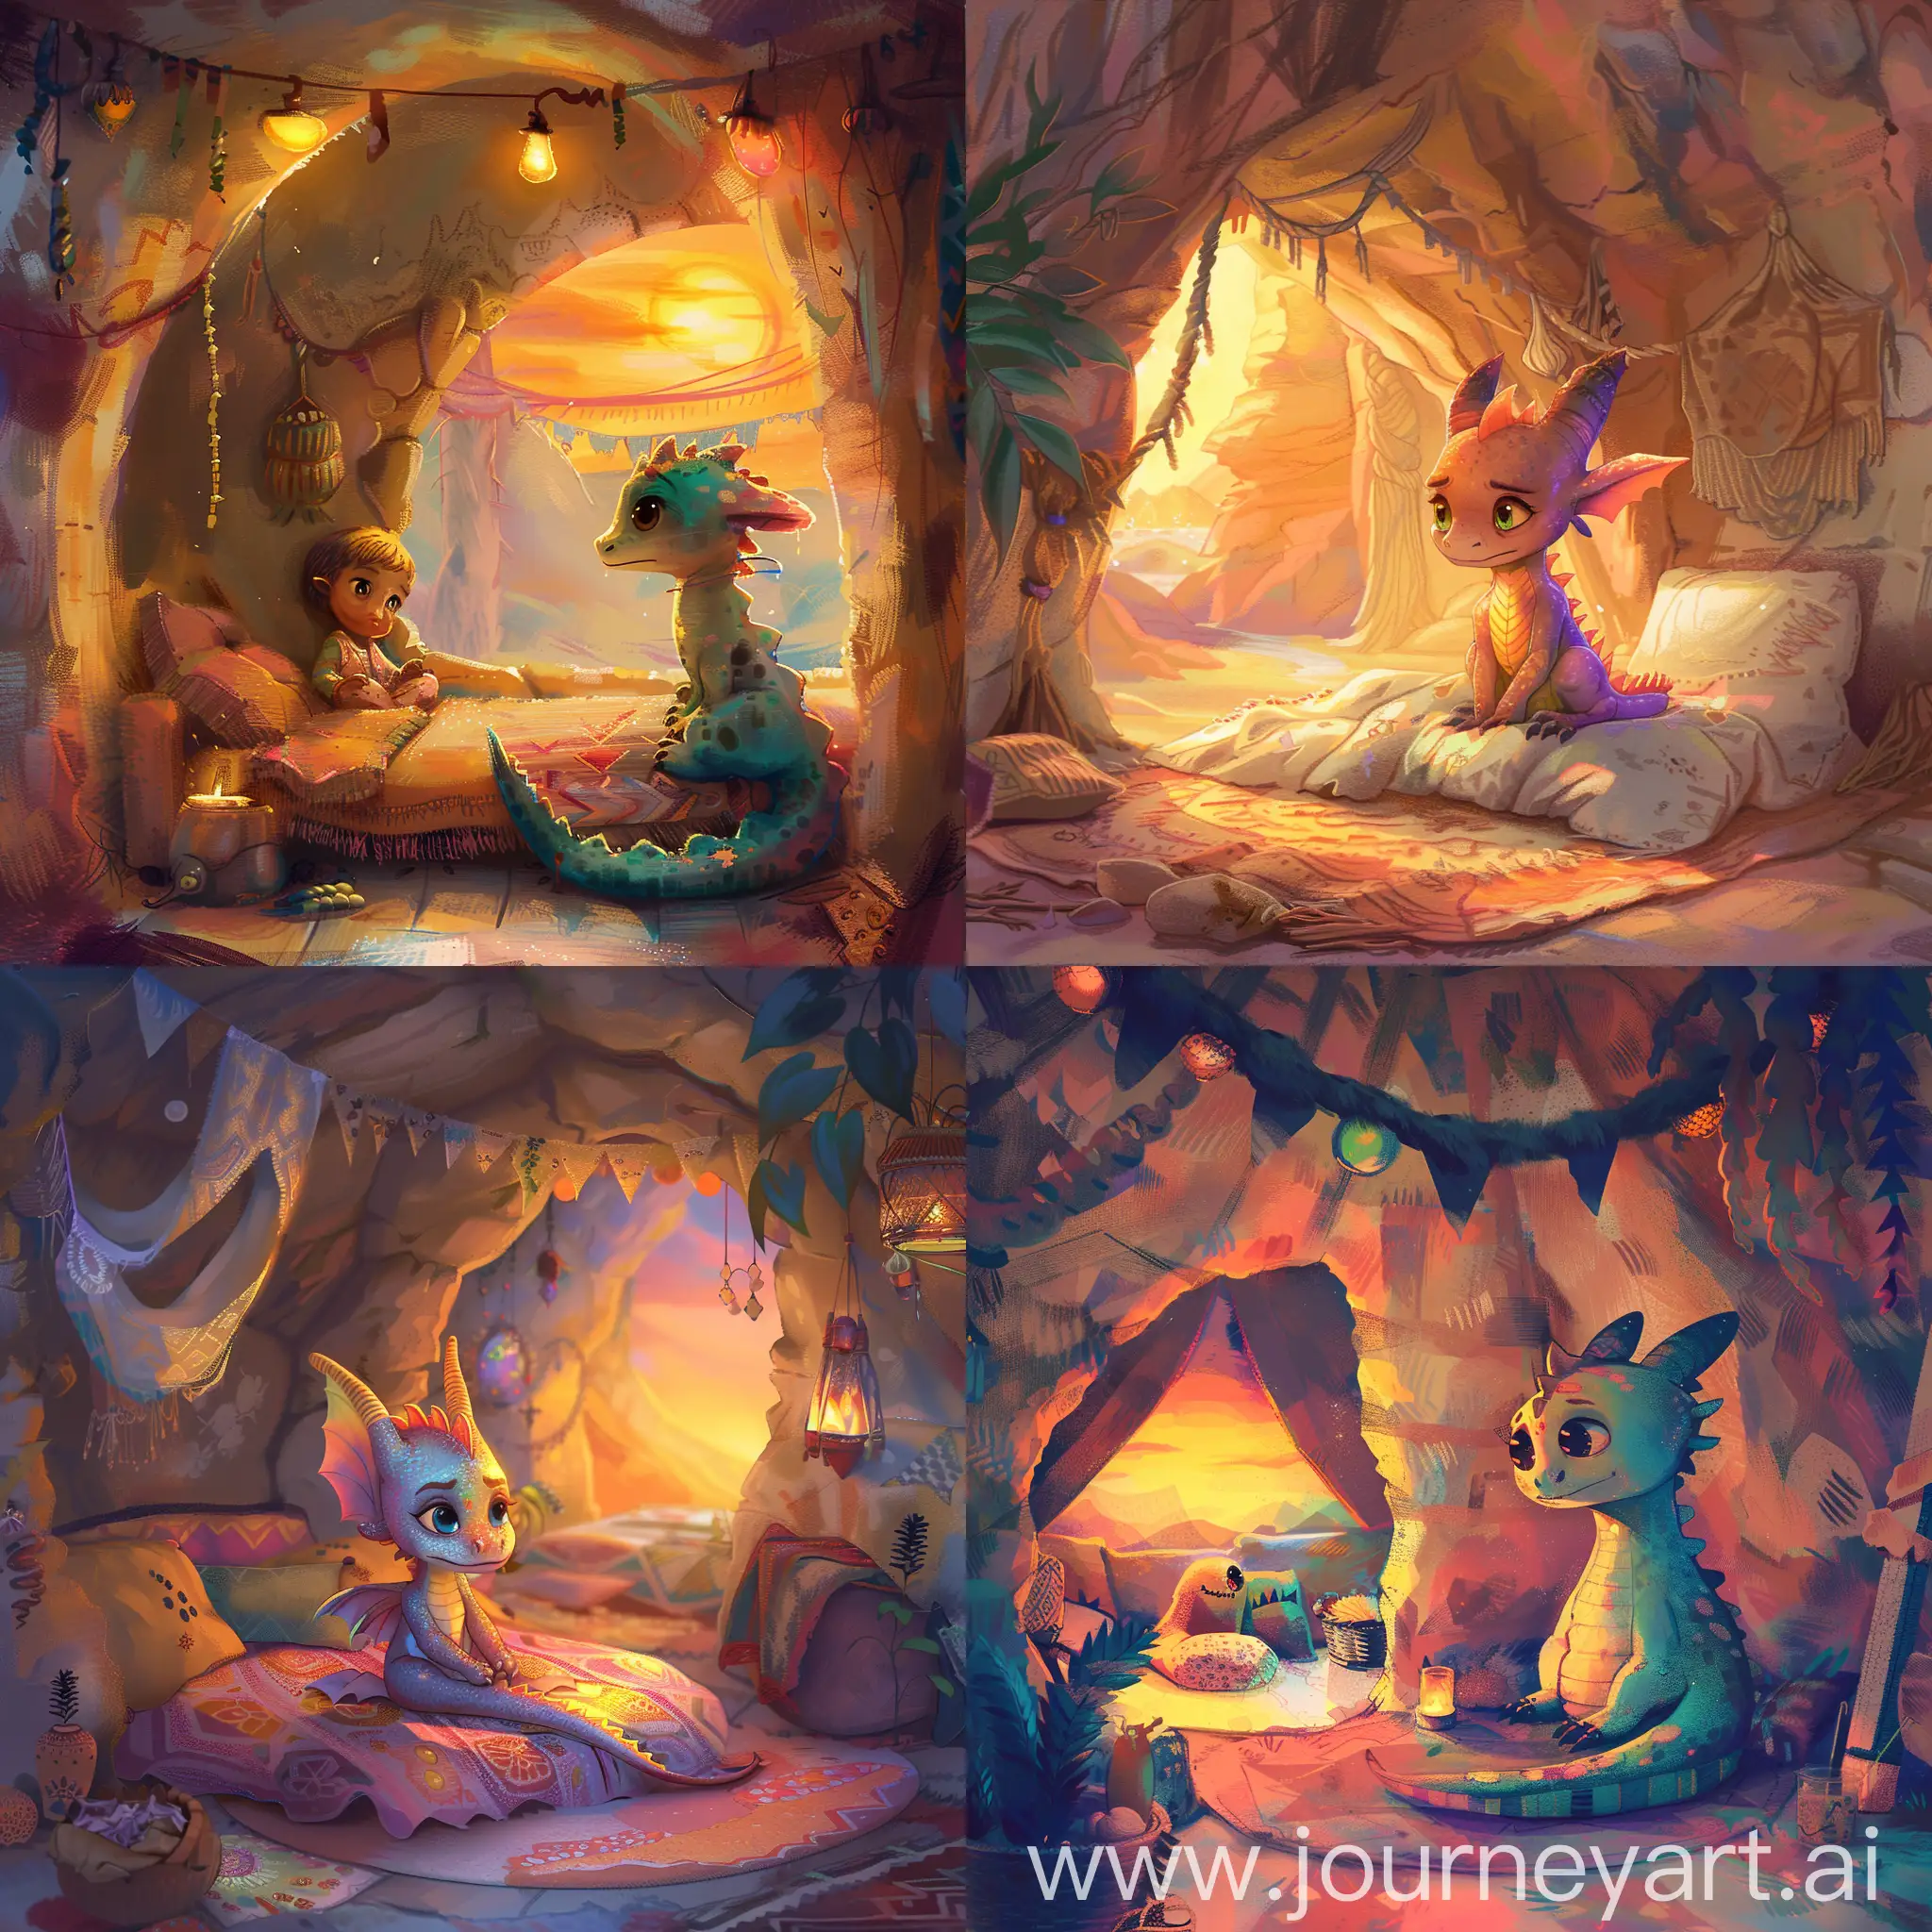 A cute, sad, baby dragon in the colours of a sunset. Sitting on her bed, in a Bohemian style cave with her mother.